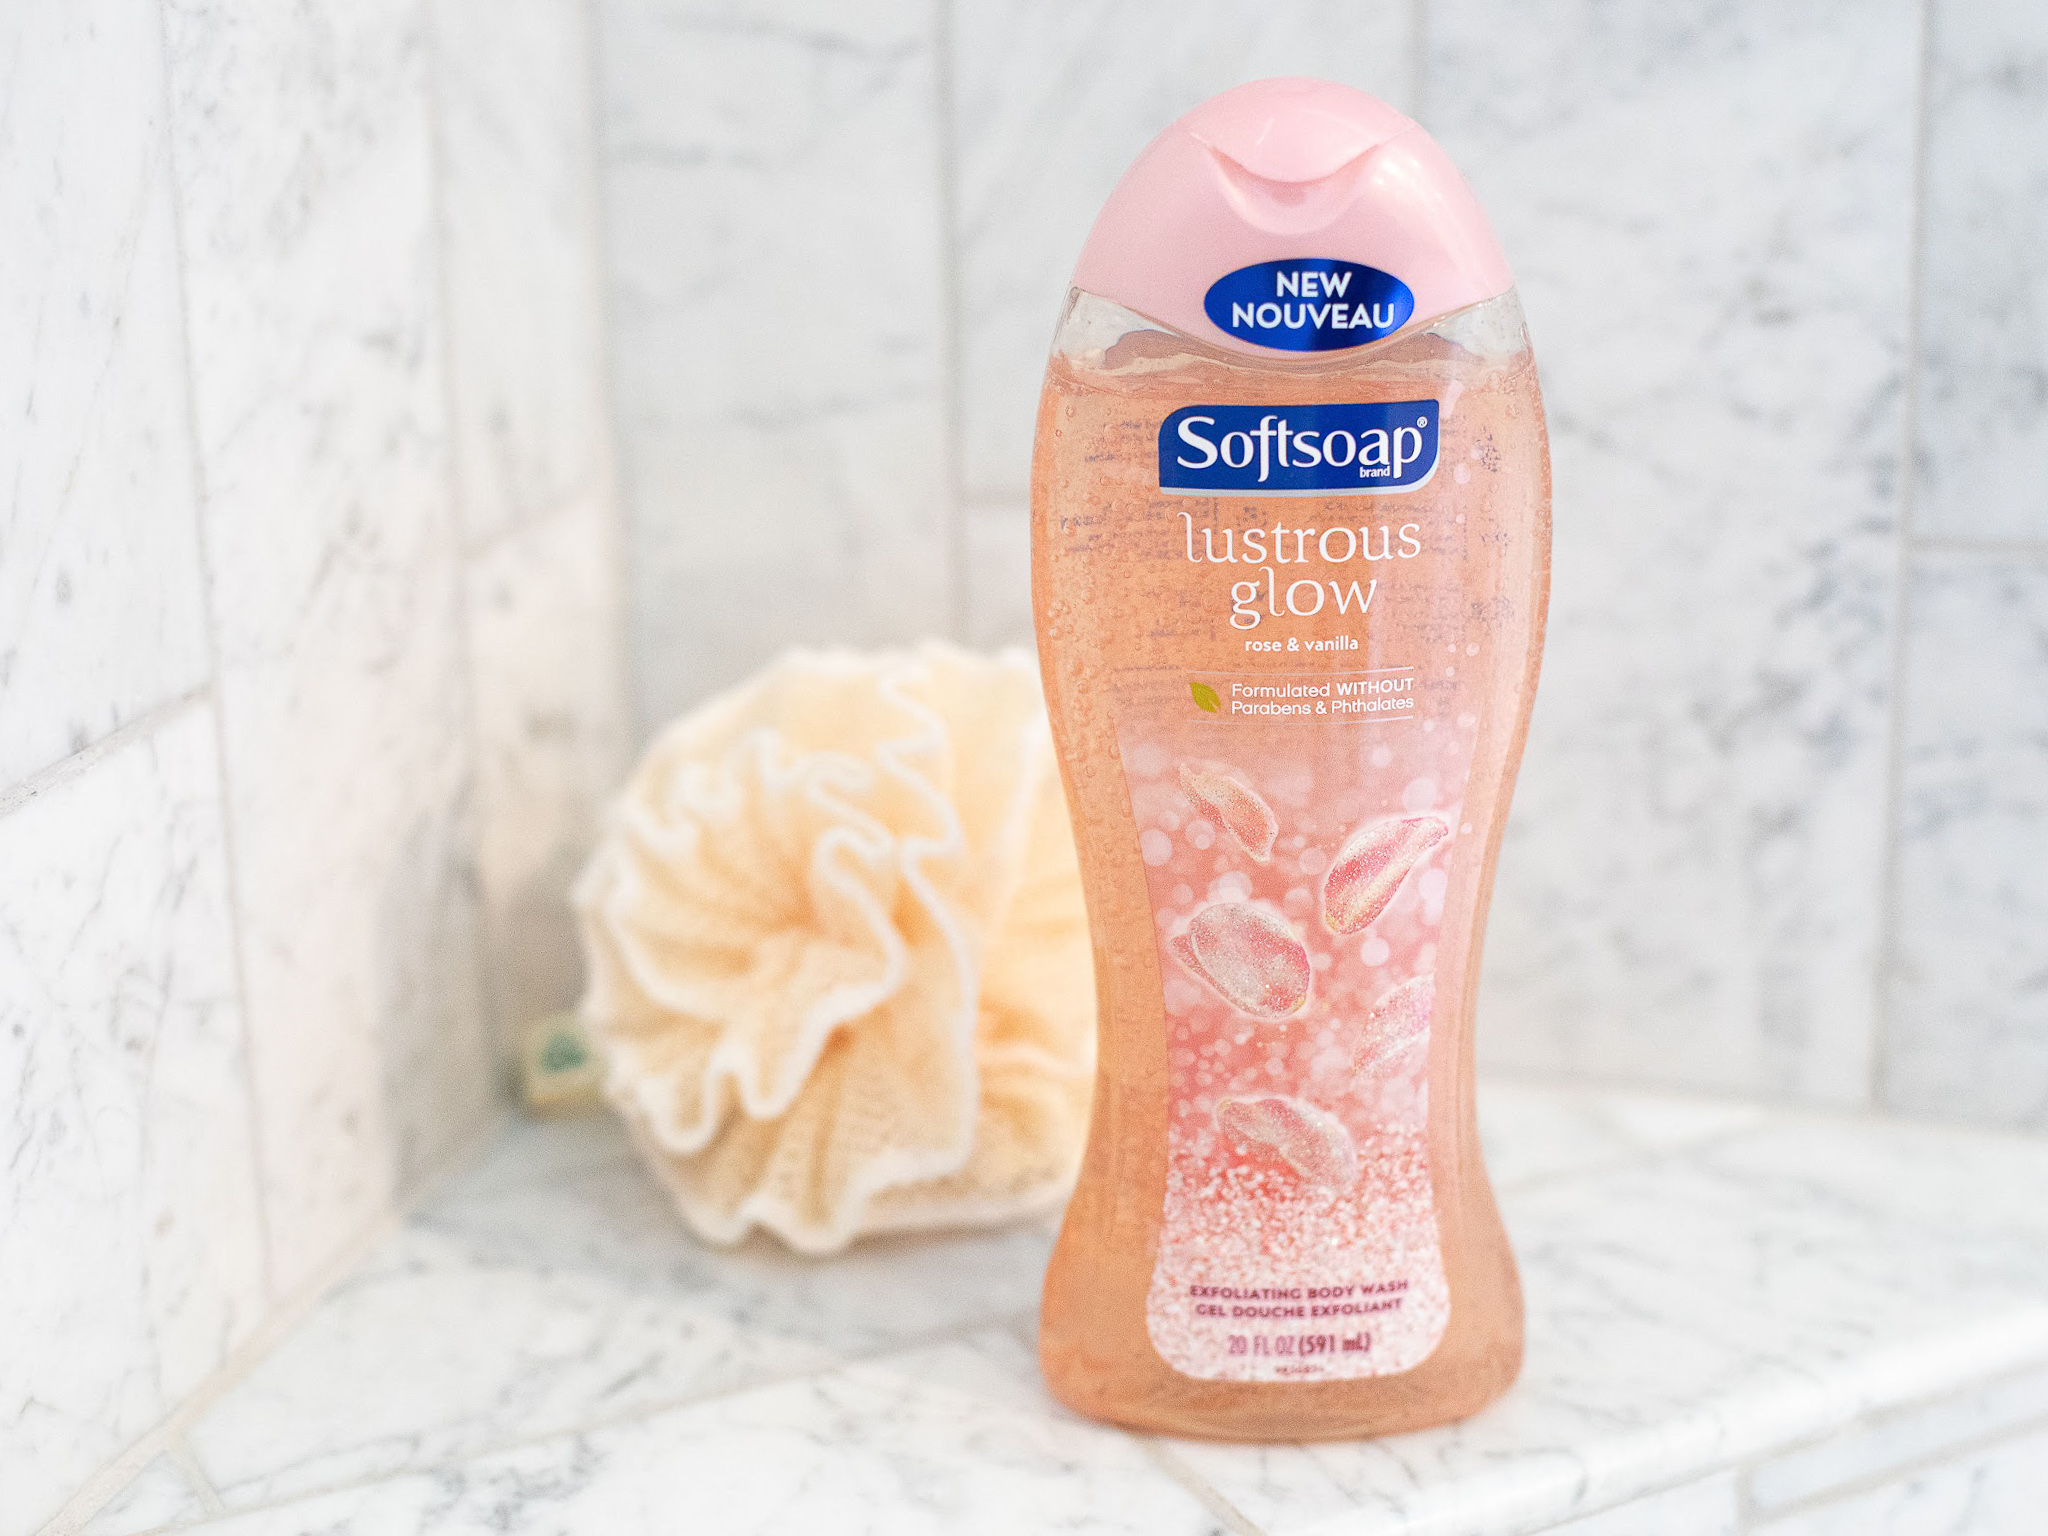 Softsoap Body Wash As Low As $2.74 At Kroger